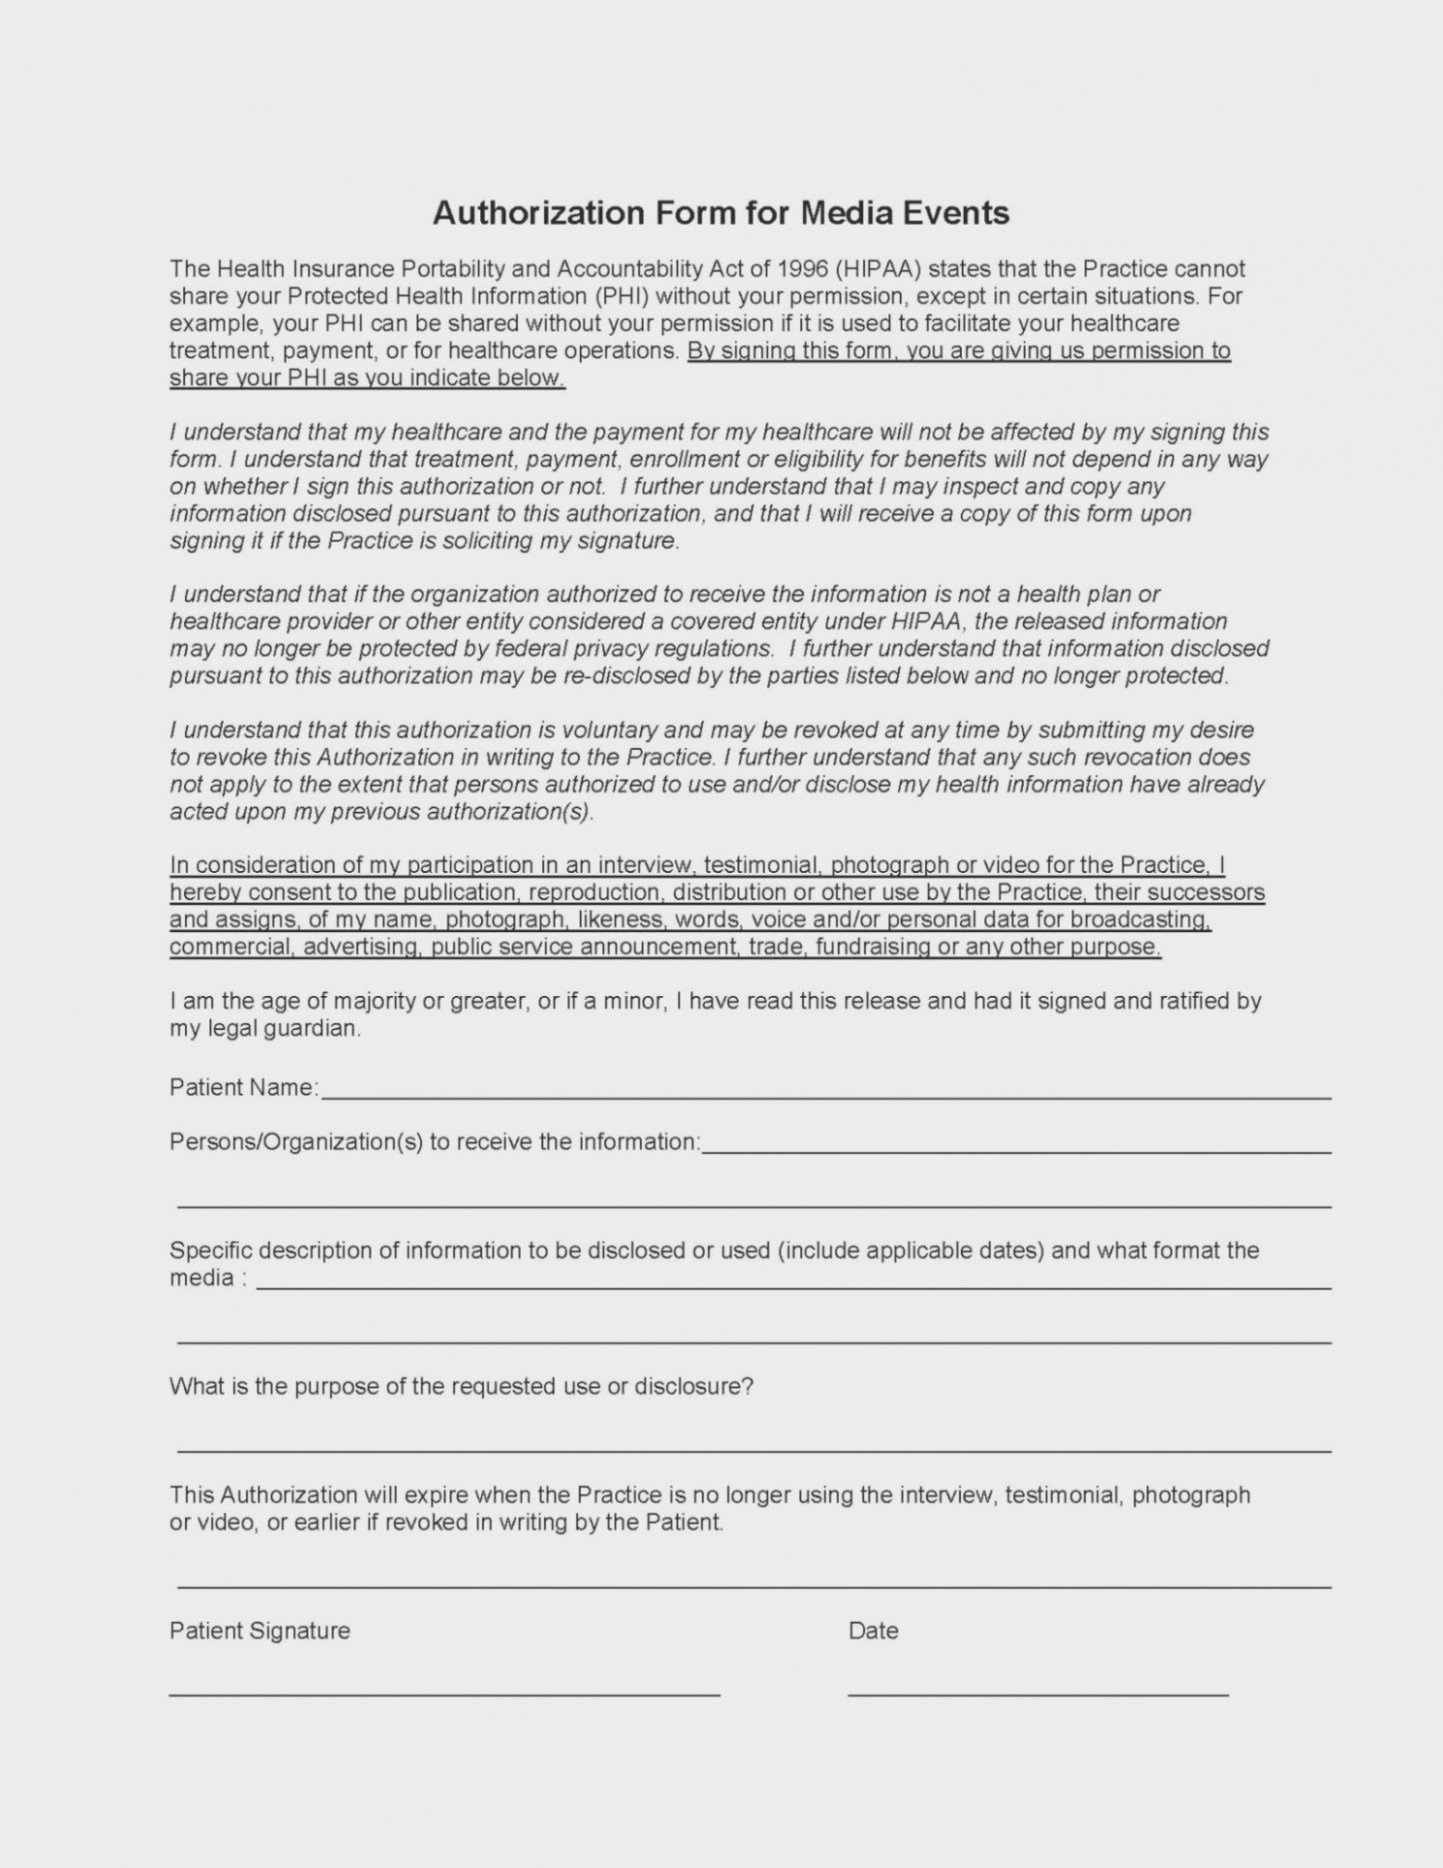 Hipaa Release form Template Elegant What Will Hipaa Release